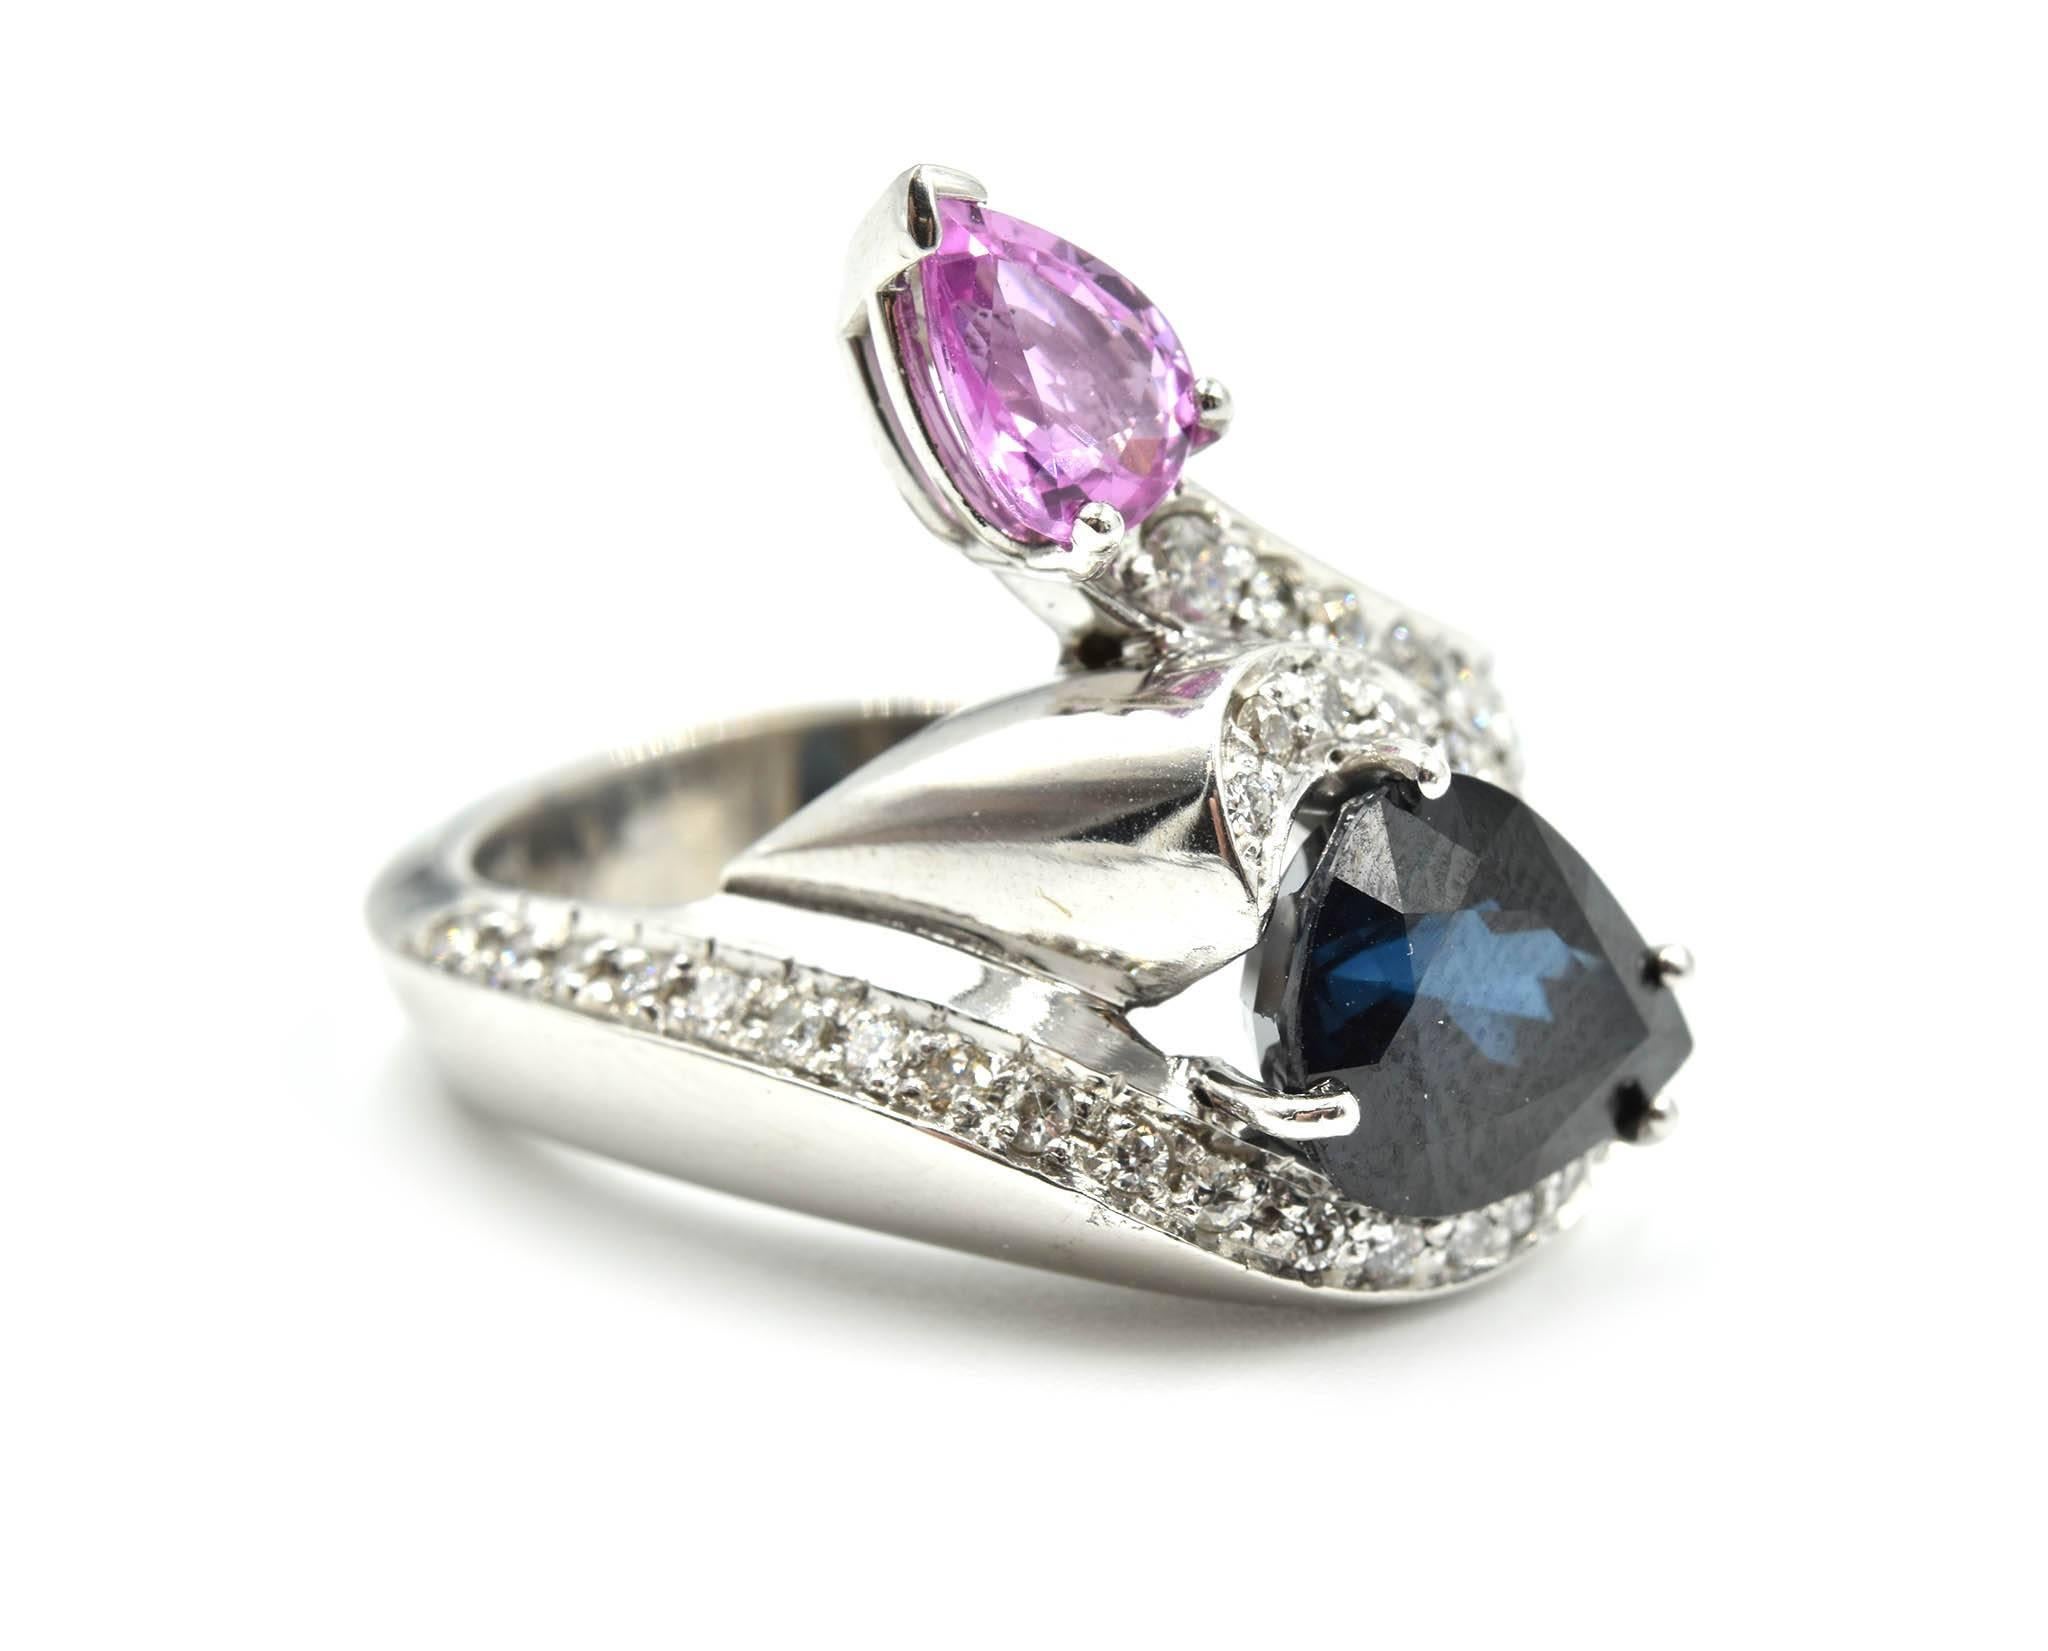 You do not see this every day!! This cocktail ring consists of 14k white gold, pear cut blue and pink sapphires, with a starry diamond mounting! The pear shaped blue sapphire weighs 3.32 carats and the pink sapphire 0.81 weighs 0.81 carats. The